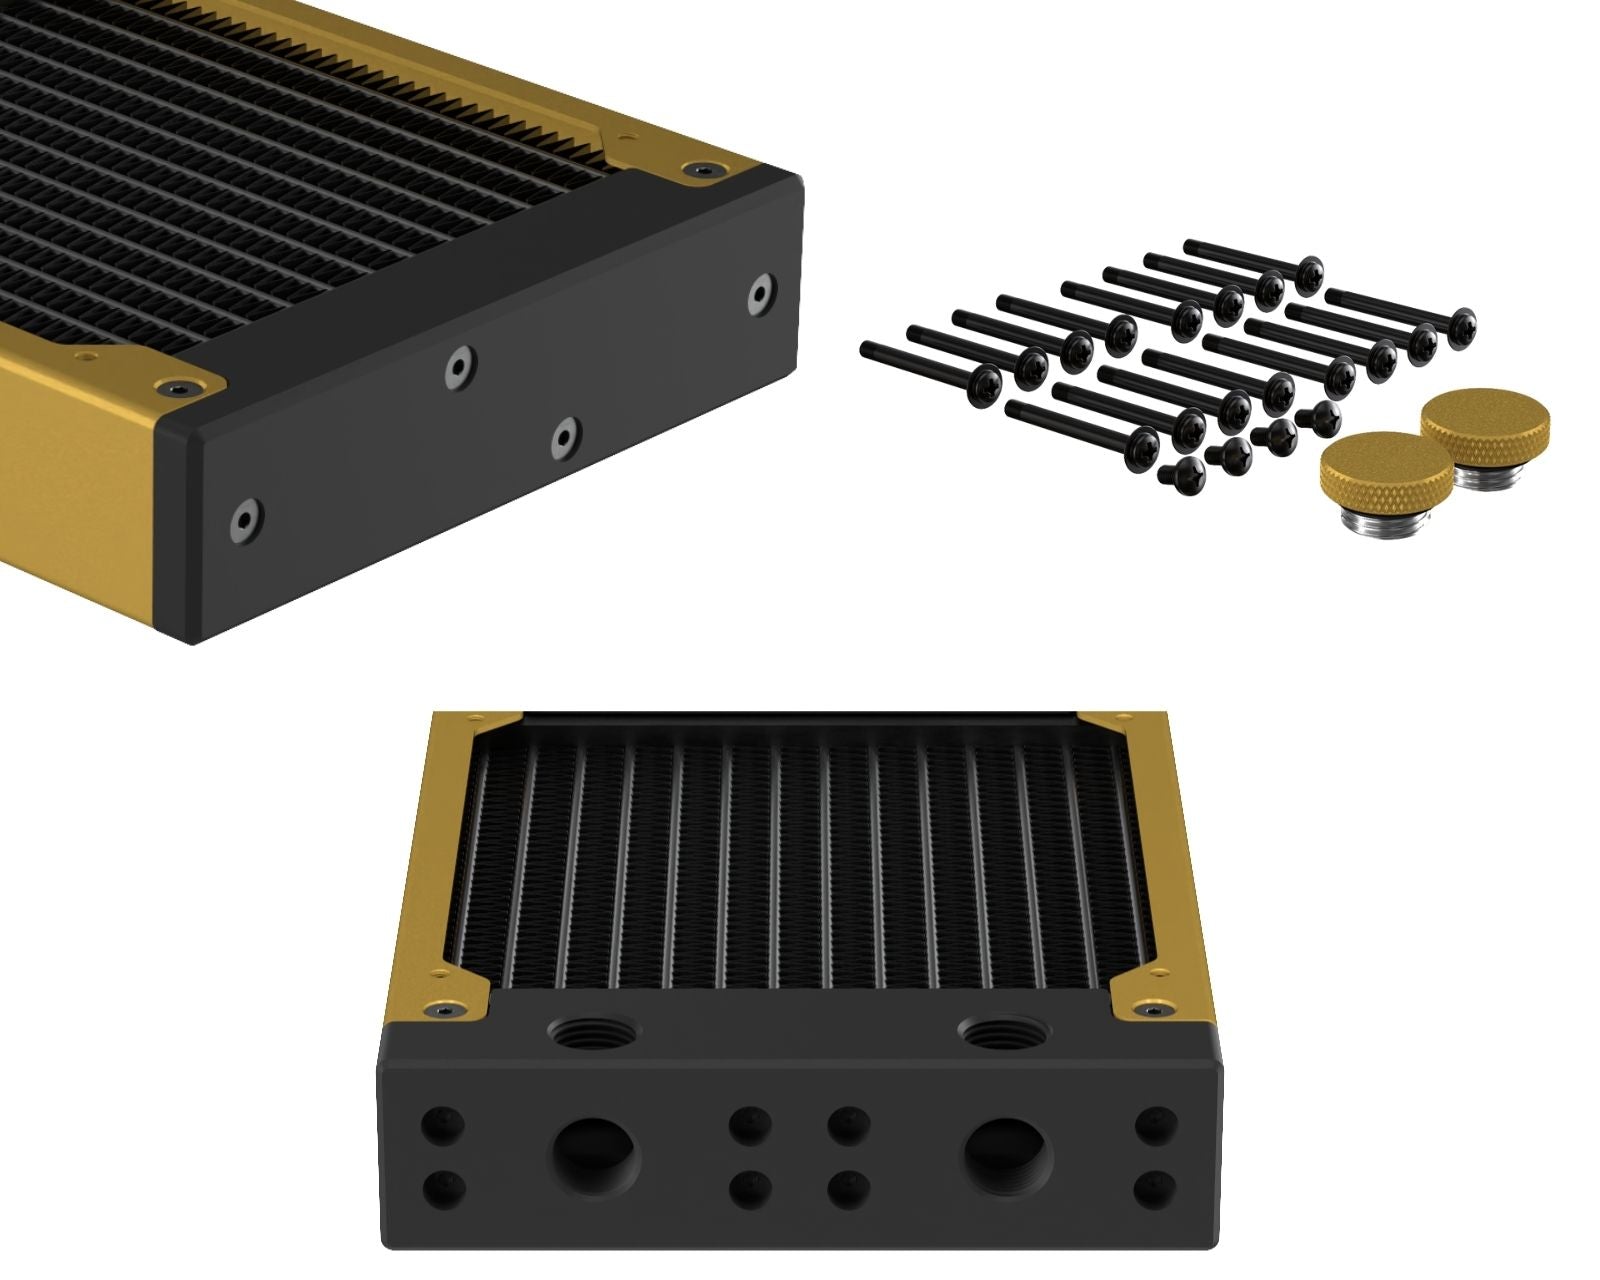 PrimoChill 480SL (30mm) EXIMO Modular Radiator, Black POM, 4x120mm, Quad Fan (R-SL-BK48) Available in 20+ Colors, Assembled in USA and Custom Watercooling Loop Ready - Gold